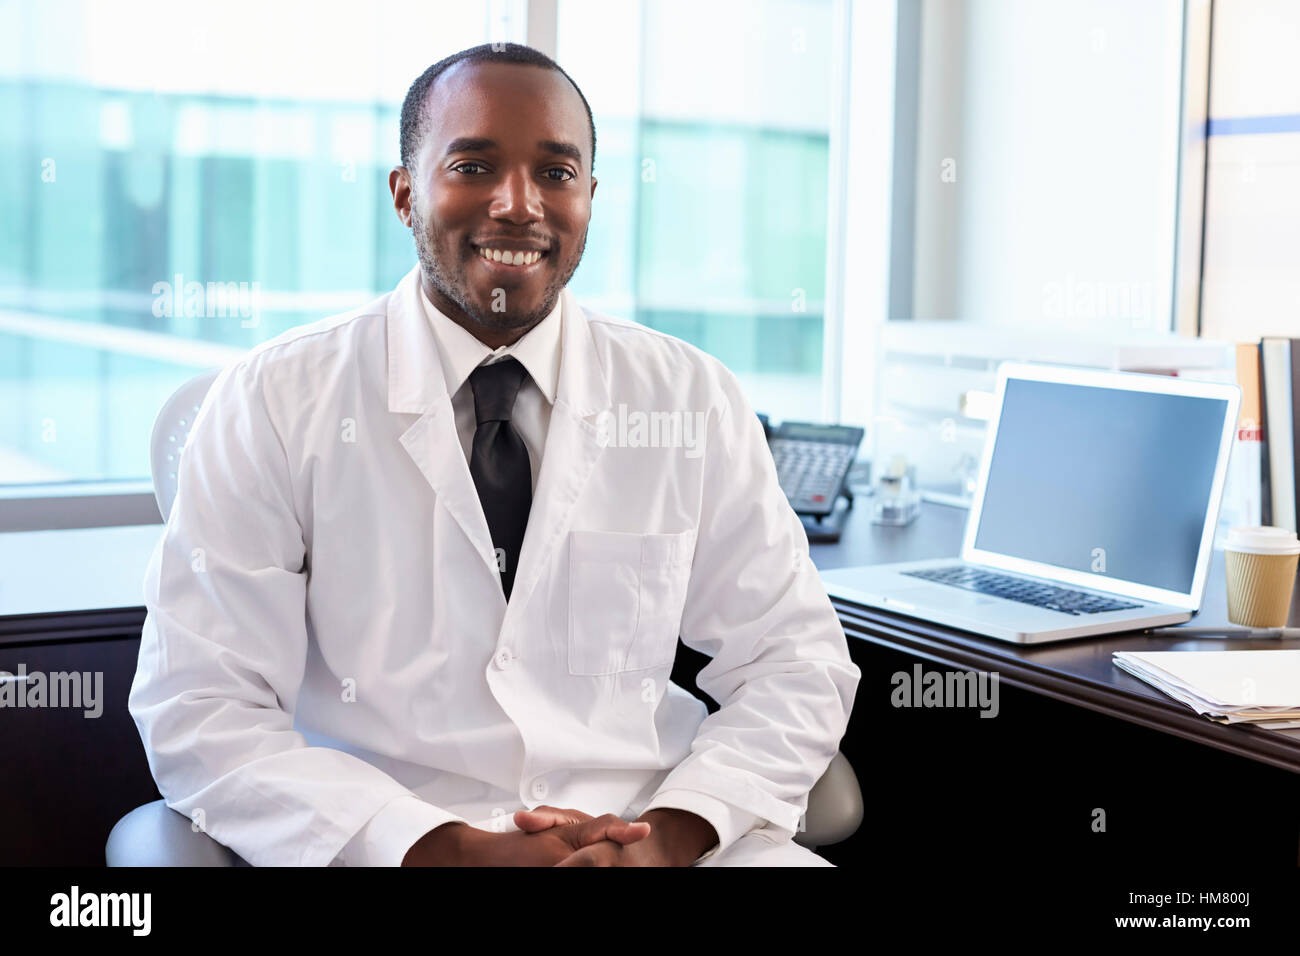 Portrait Of Doctor Wearing White Coat In Office Stock Photo